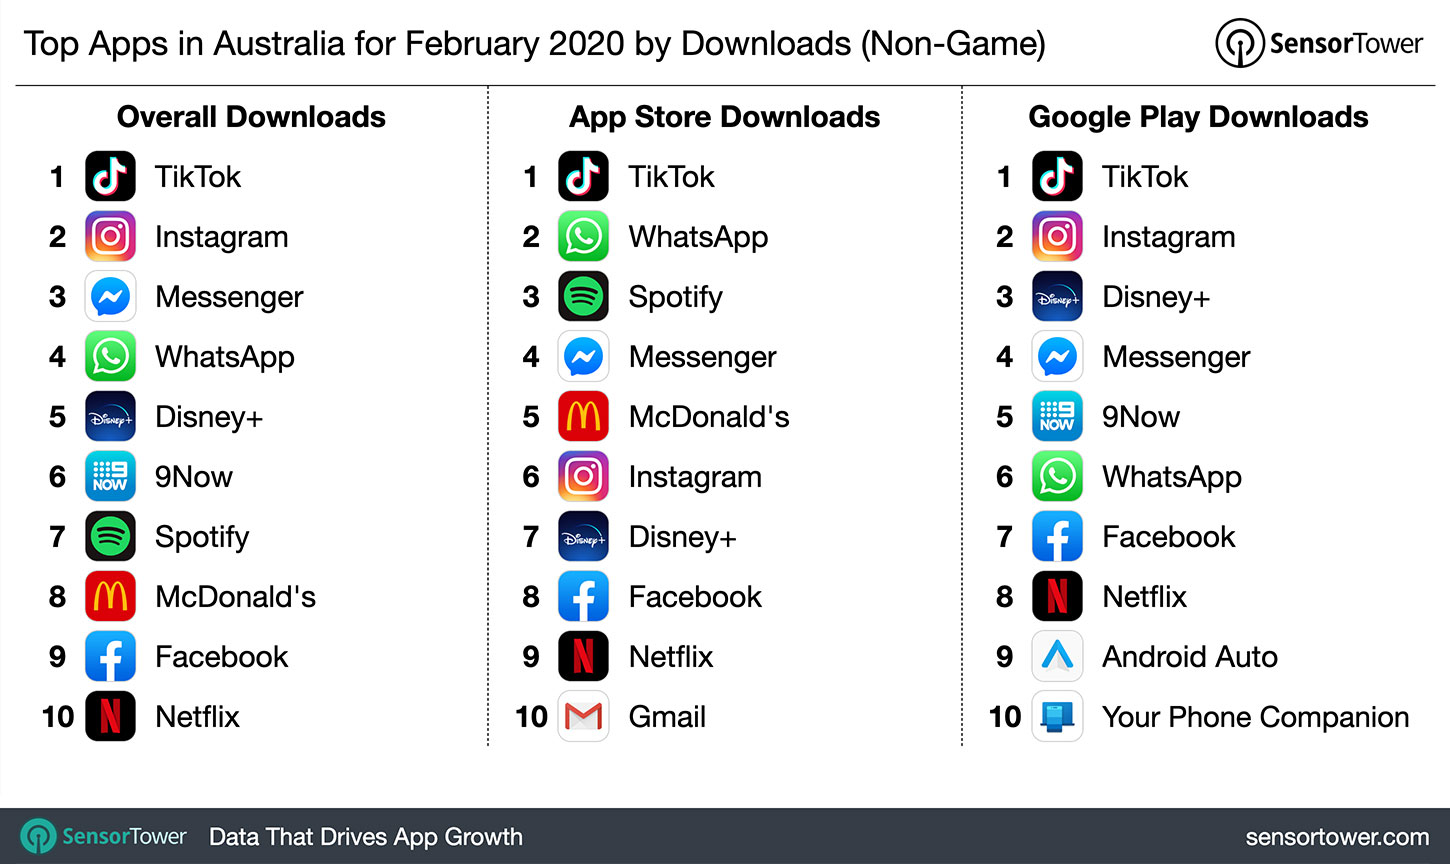 Top Apps in Australia for February 2020 by Downloads